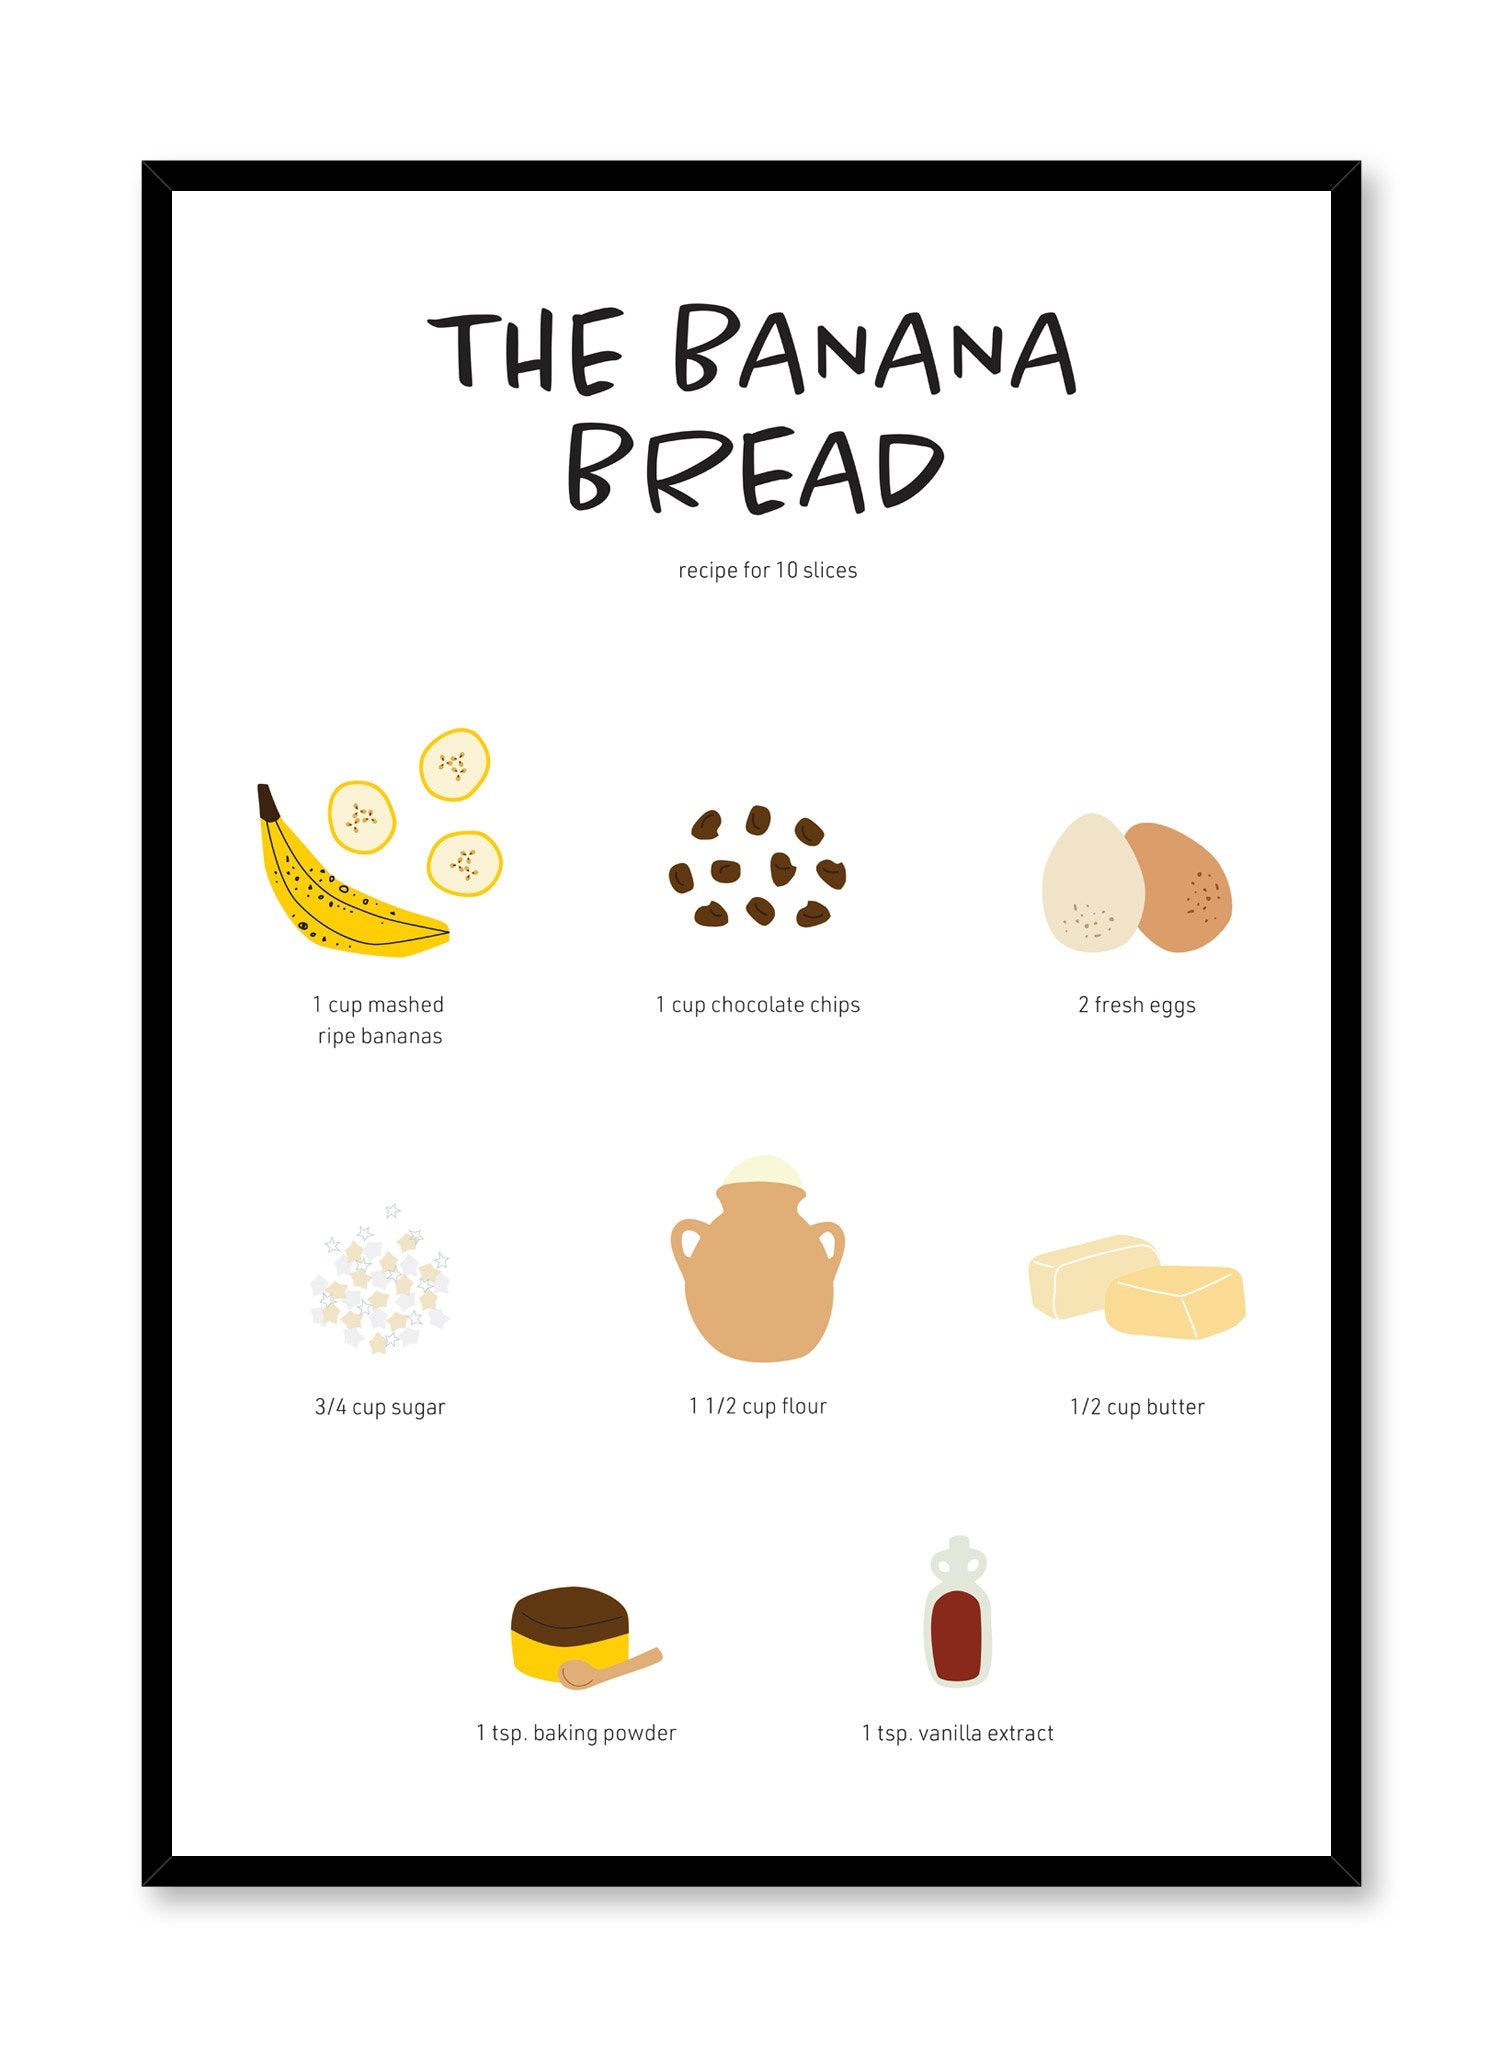 The Banana Bread Recipe is an illustrated recipe poster by Opposite Wall.